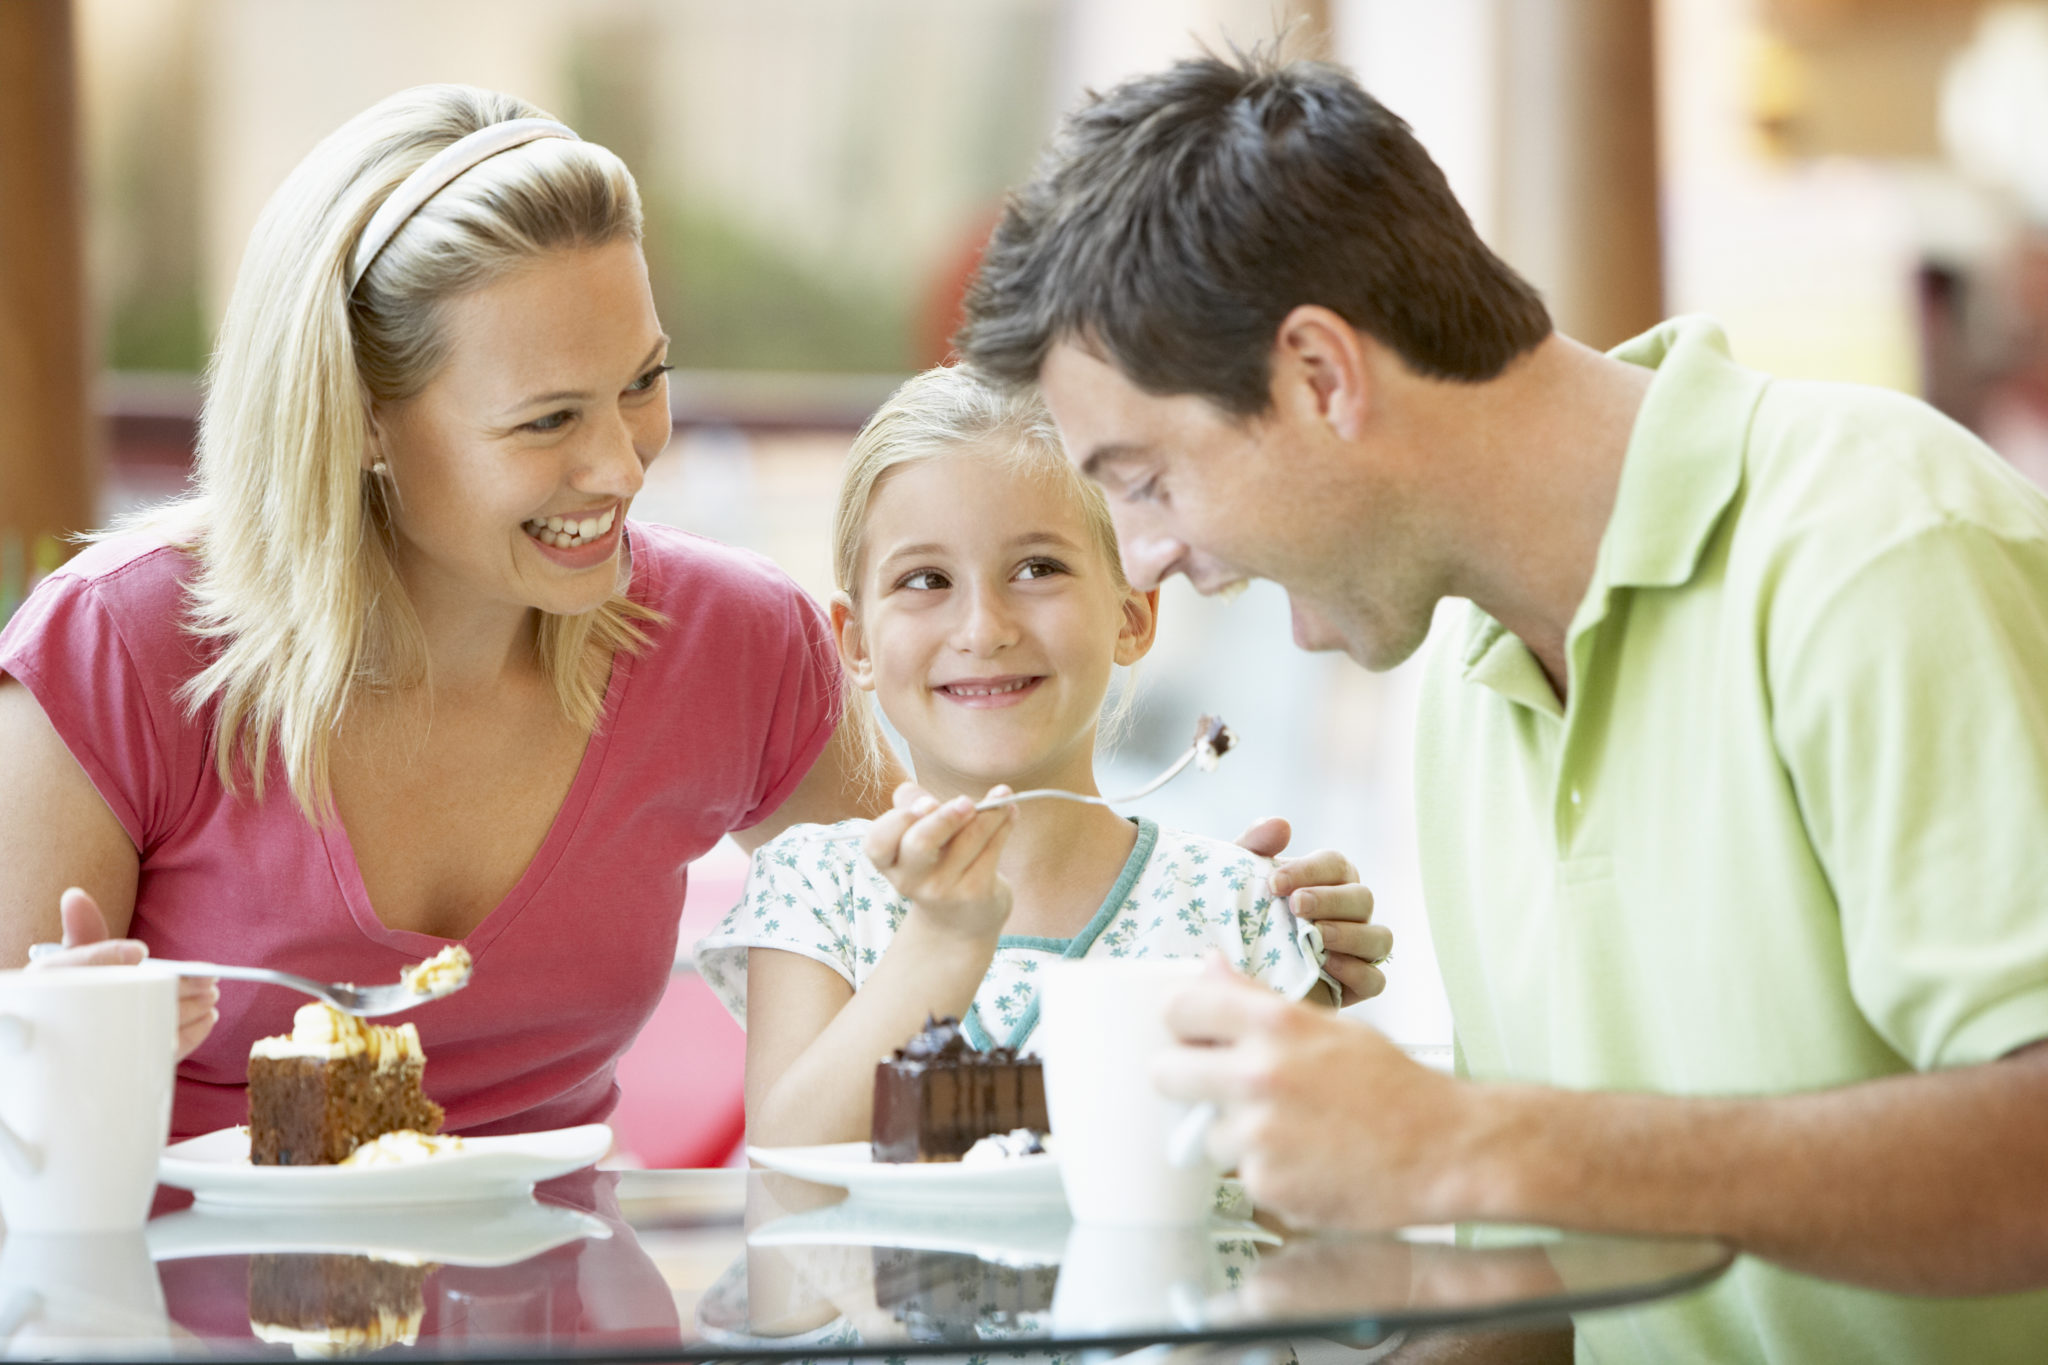 Families enjoy going out to eat for the sense of bonding.